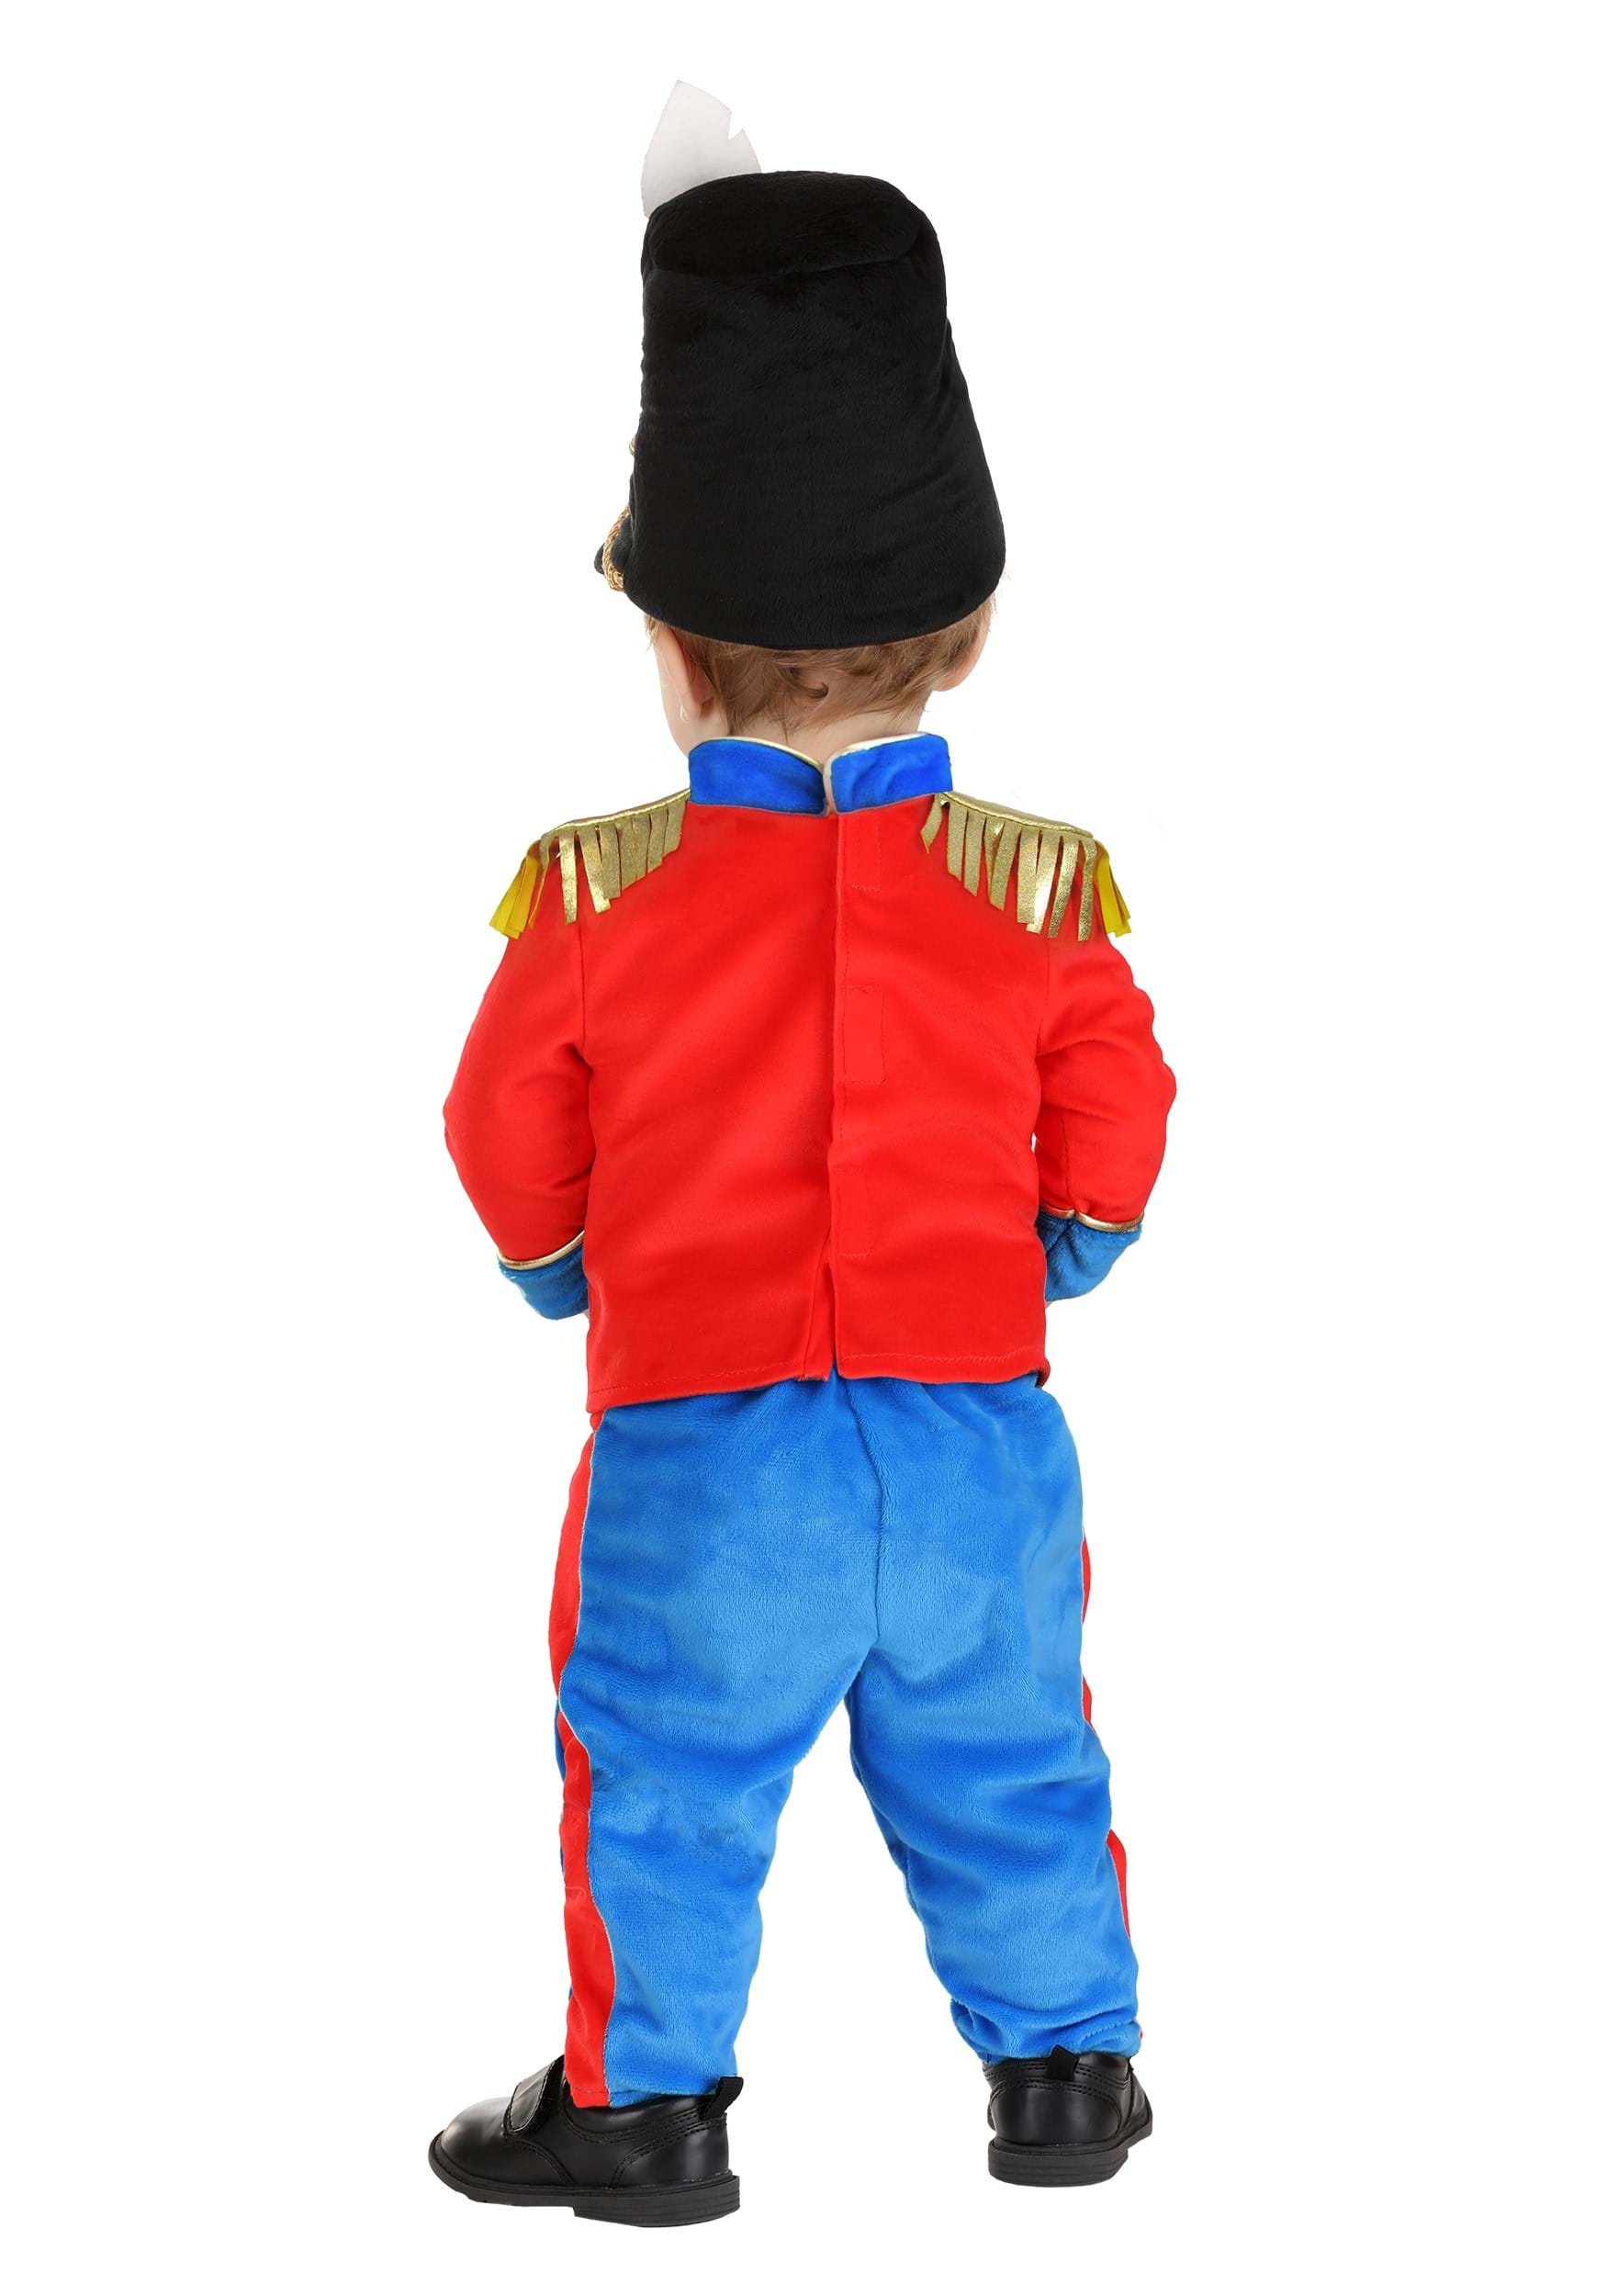 Toy Soldier Costume For Infants